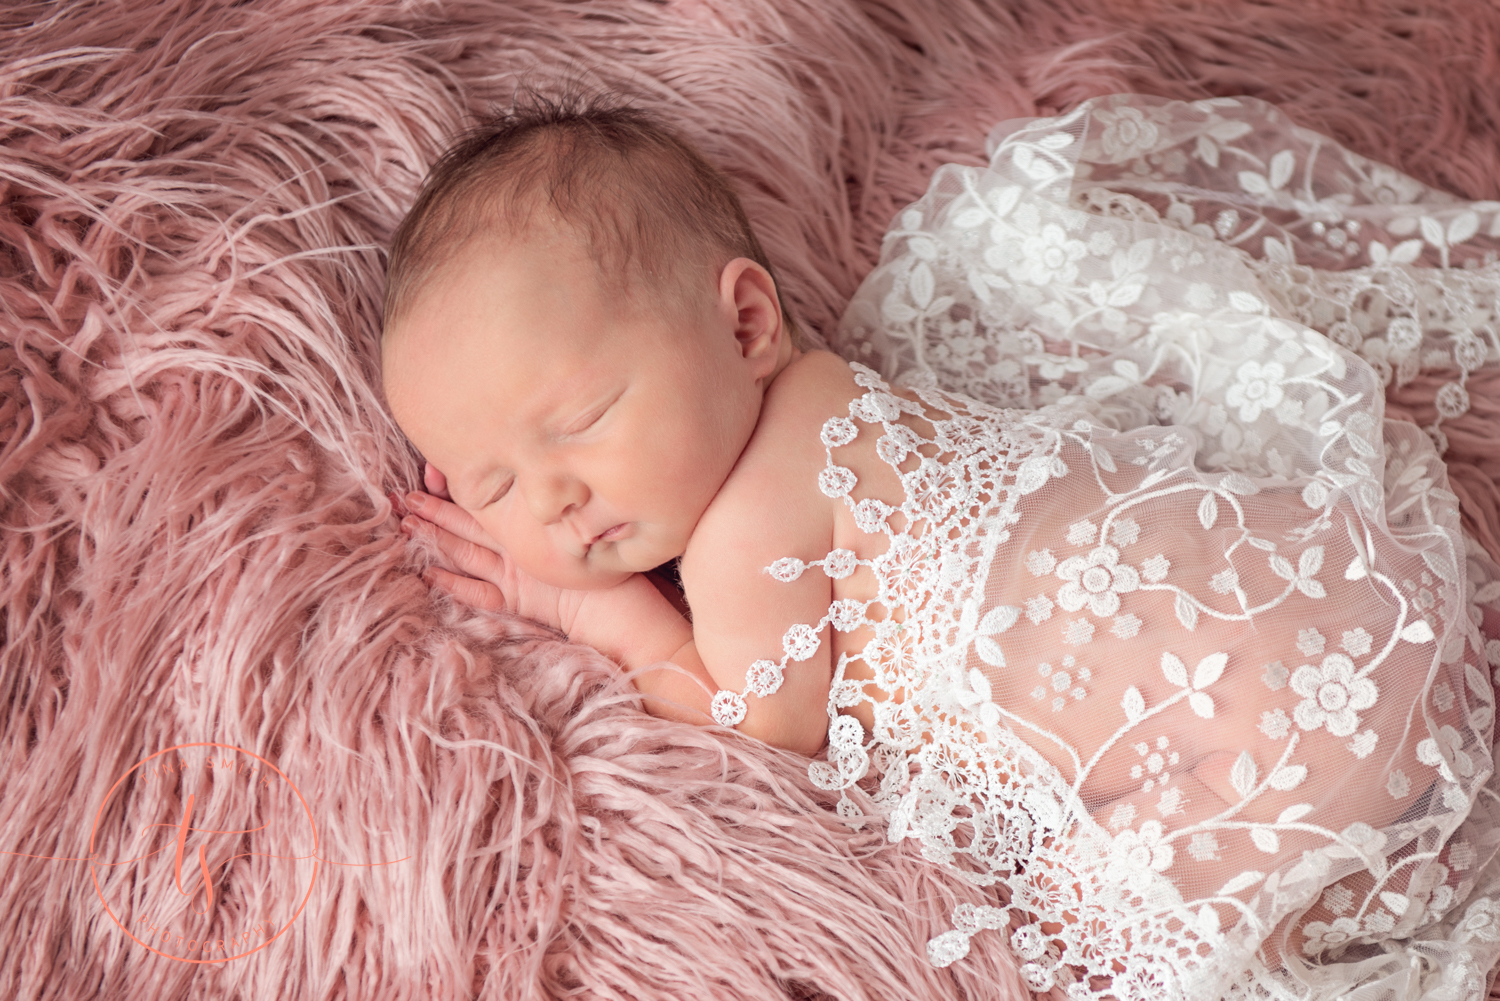 newborn baby on pink fur wrapped in white lace